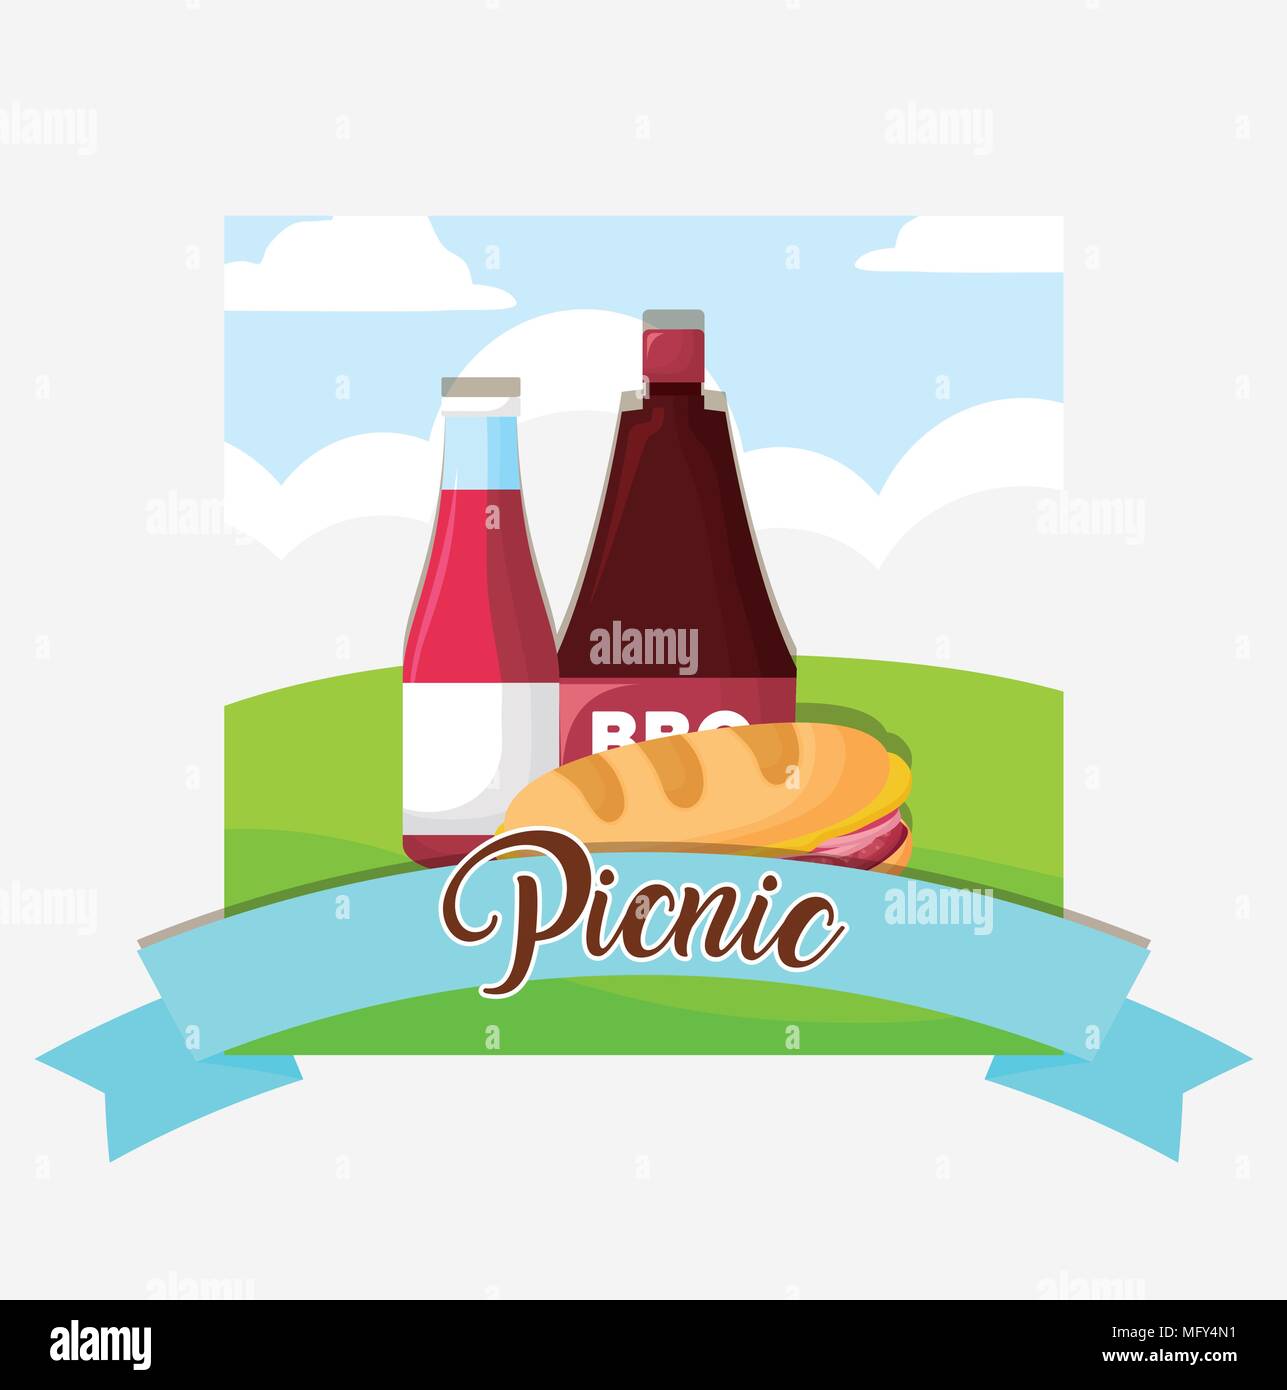 picnic emblem with sandwich and sauce bottles over landscape and white background, colorful design. vector illustration Stock Vector